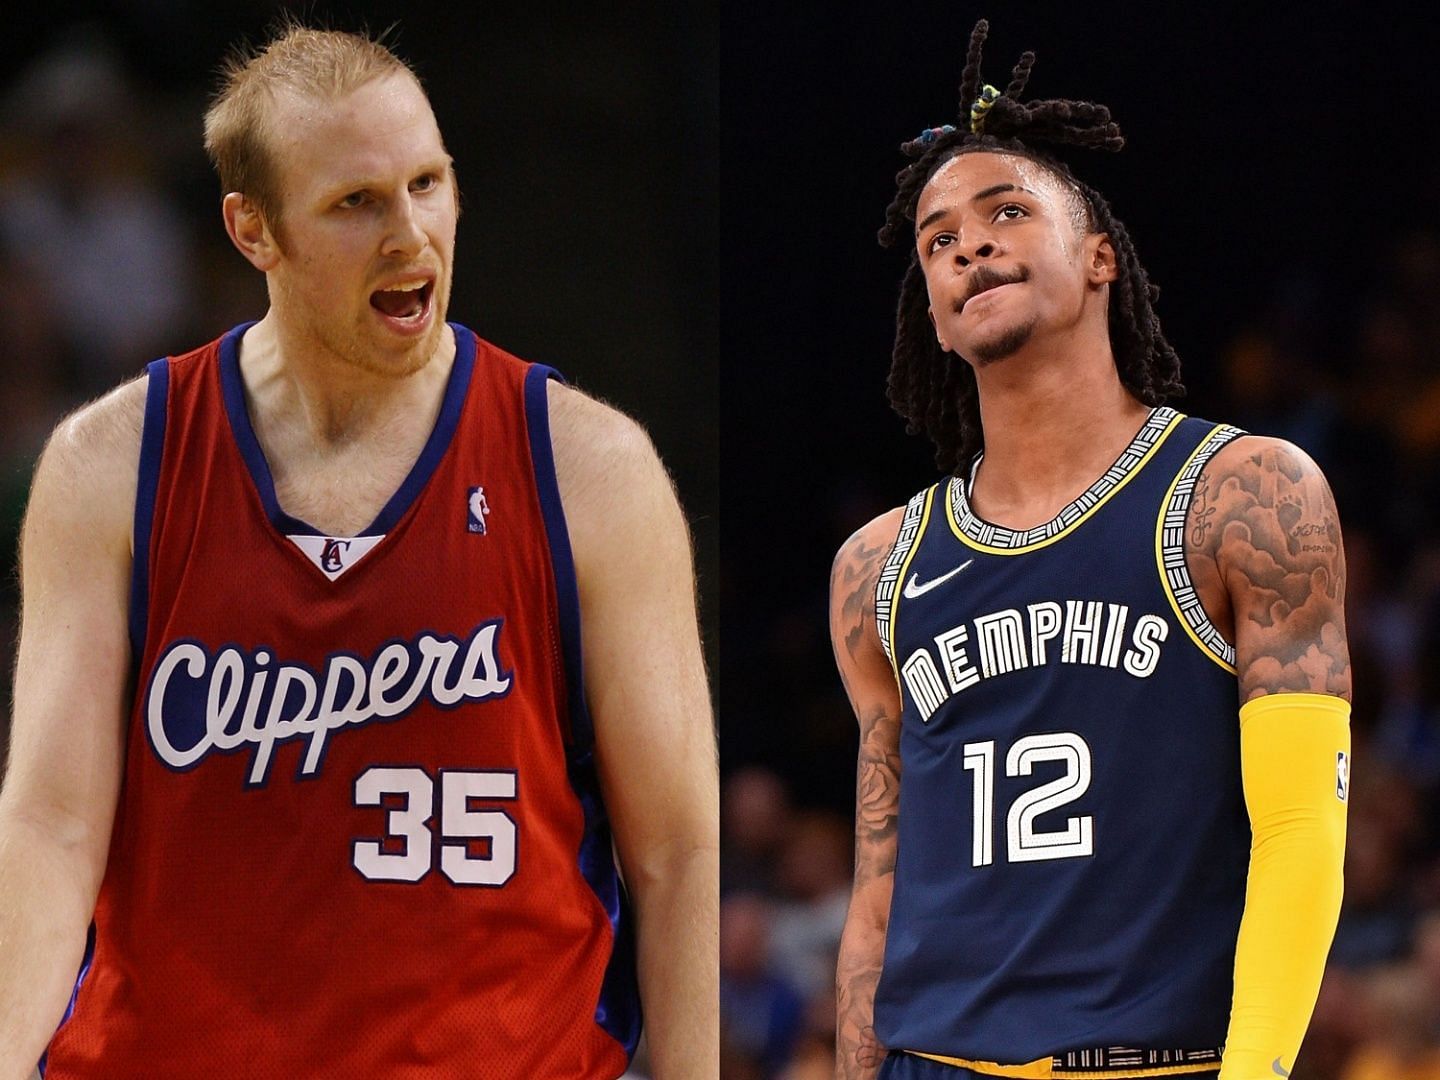 Chris Kaman of the LA Clippers and Ja Morant of the Memphis Grizzlies